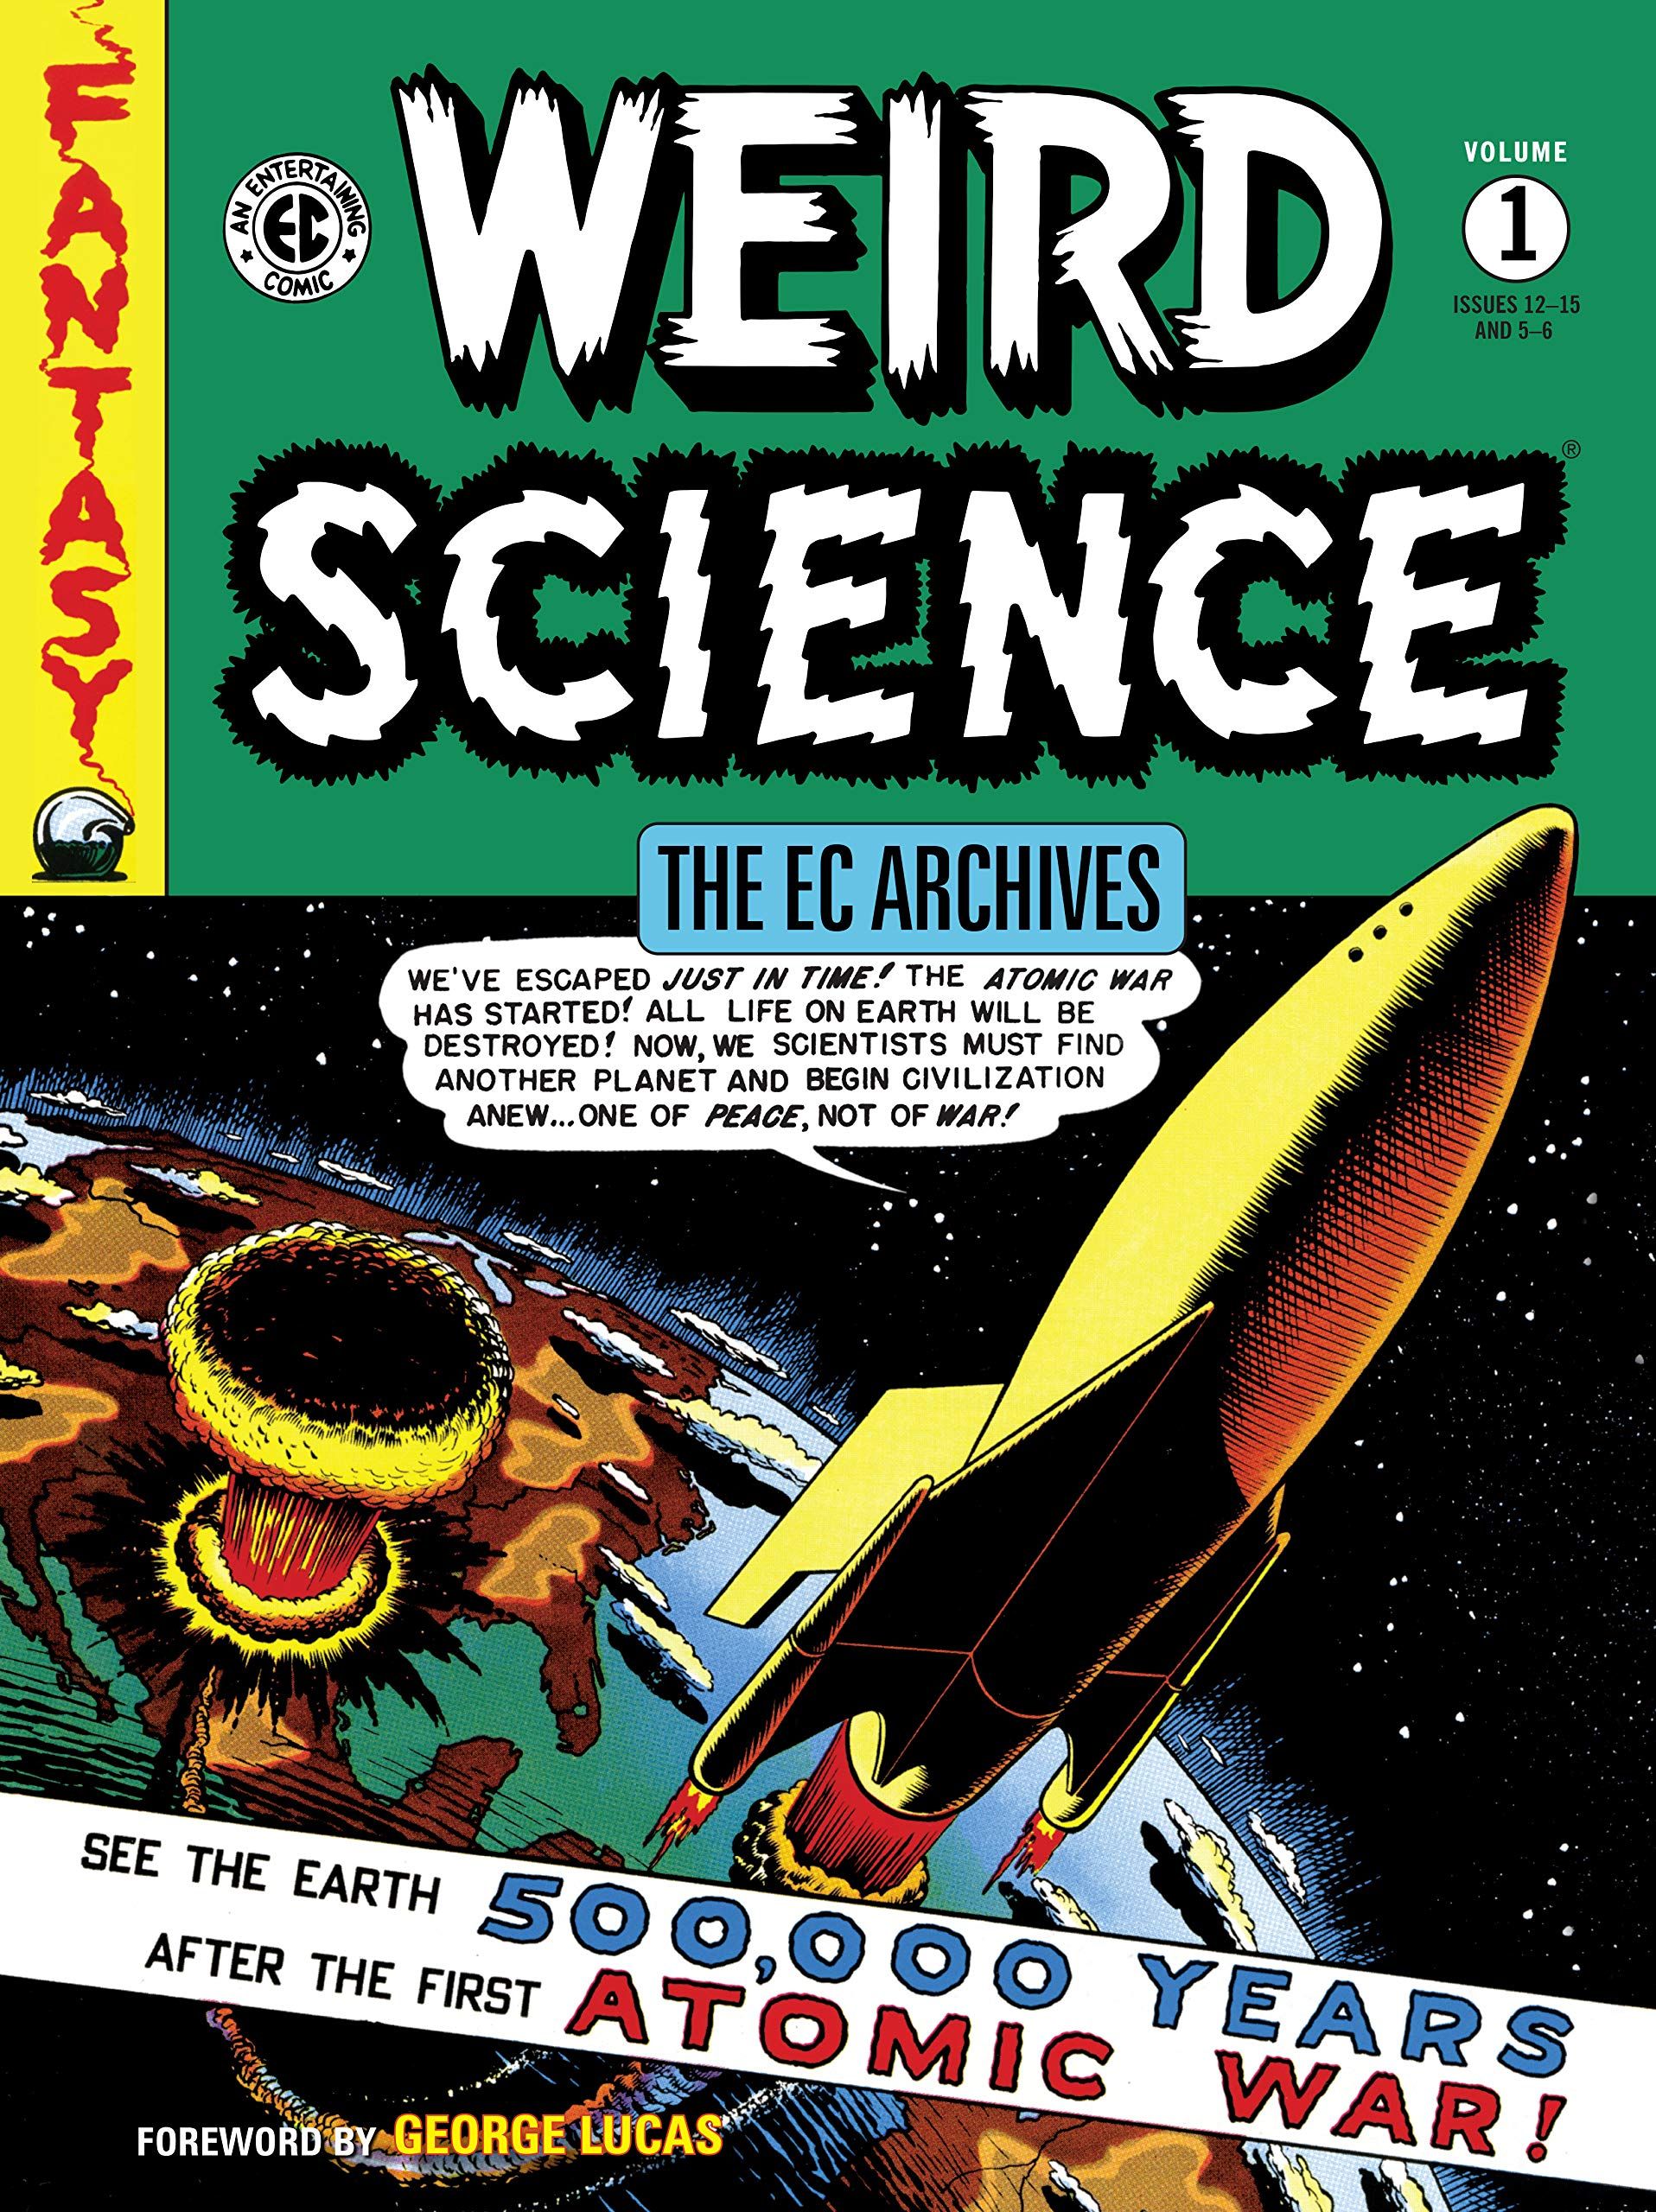 Retro Comic Weird Science Has Never Looked Better in New Collected Edition